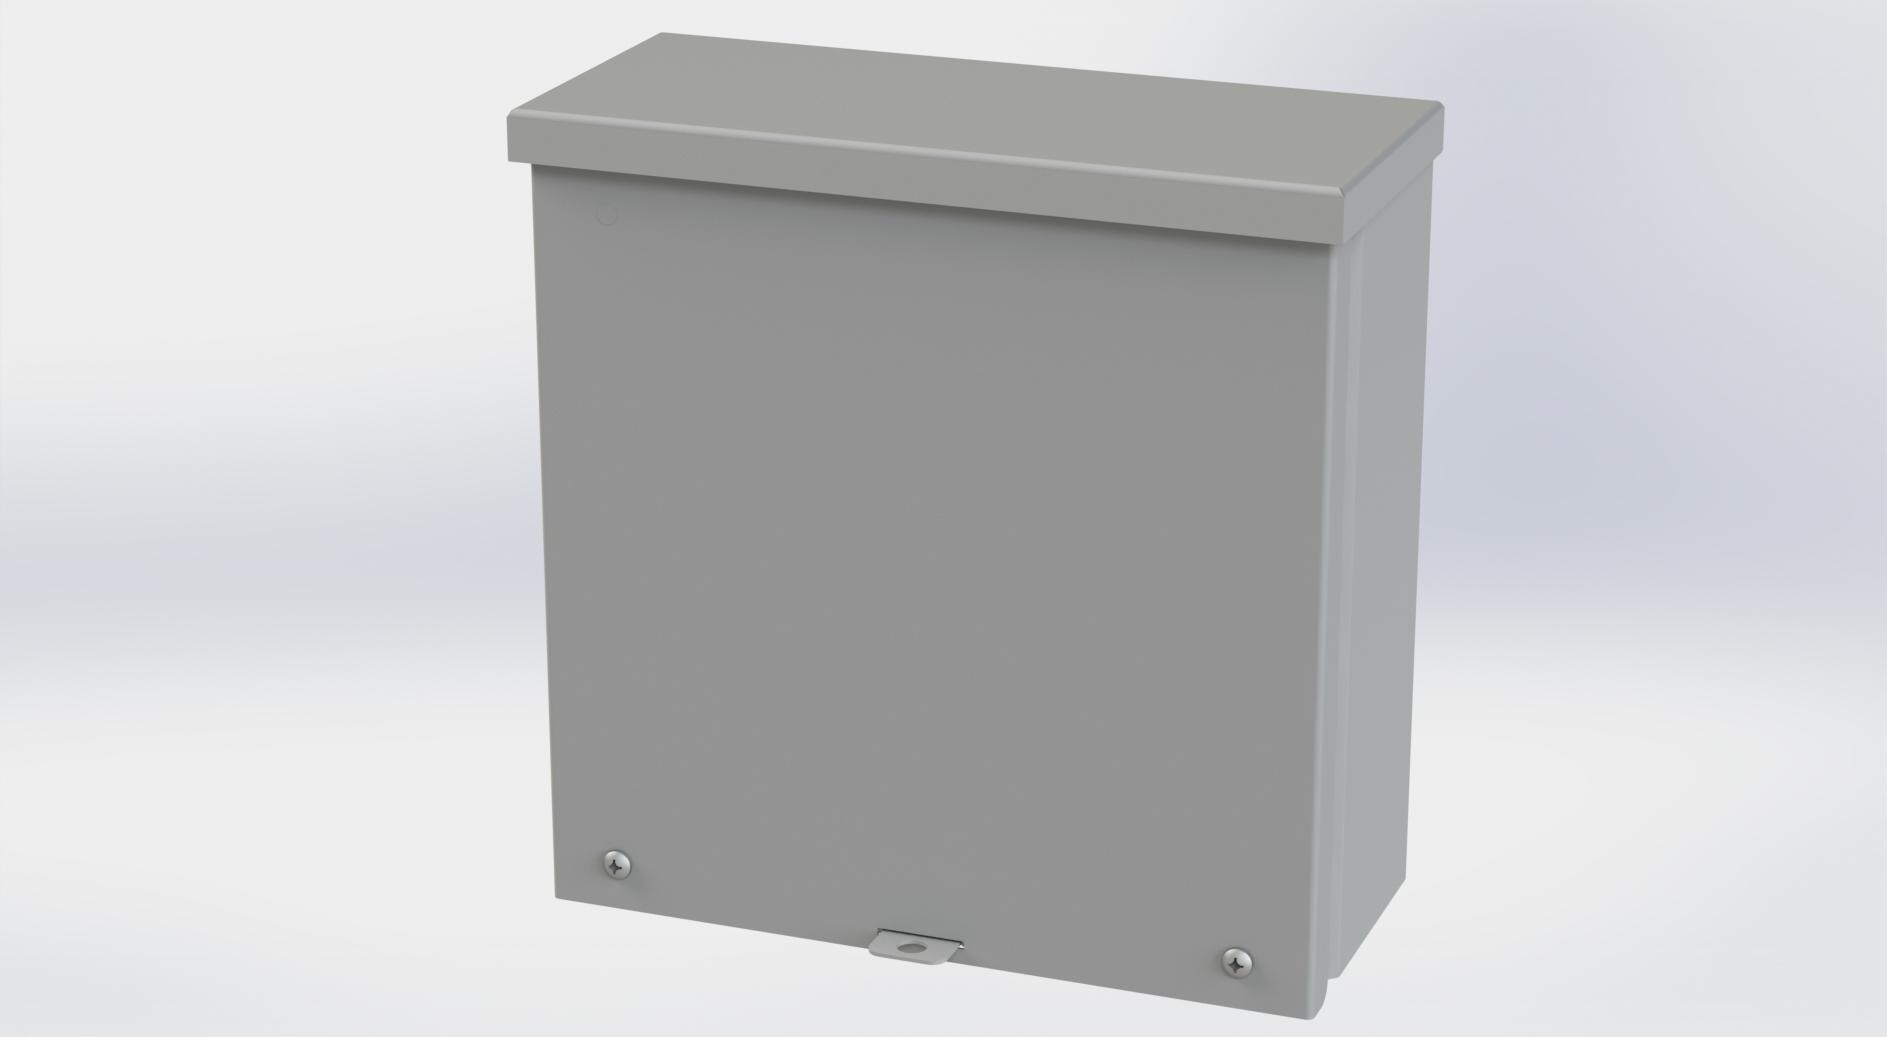 Saginaw Control SCE-10R104 Type-3R Screw Cover Enclosure, Height:10.00", Width:10.00", Depth:4.00", ANSI-61 gray powder coating inside and out.